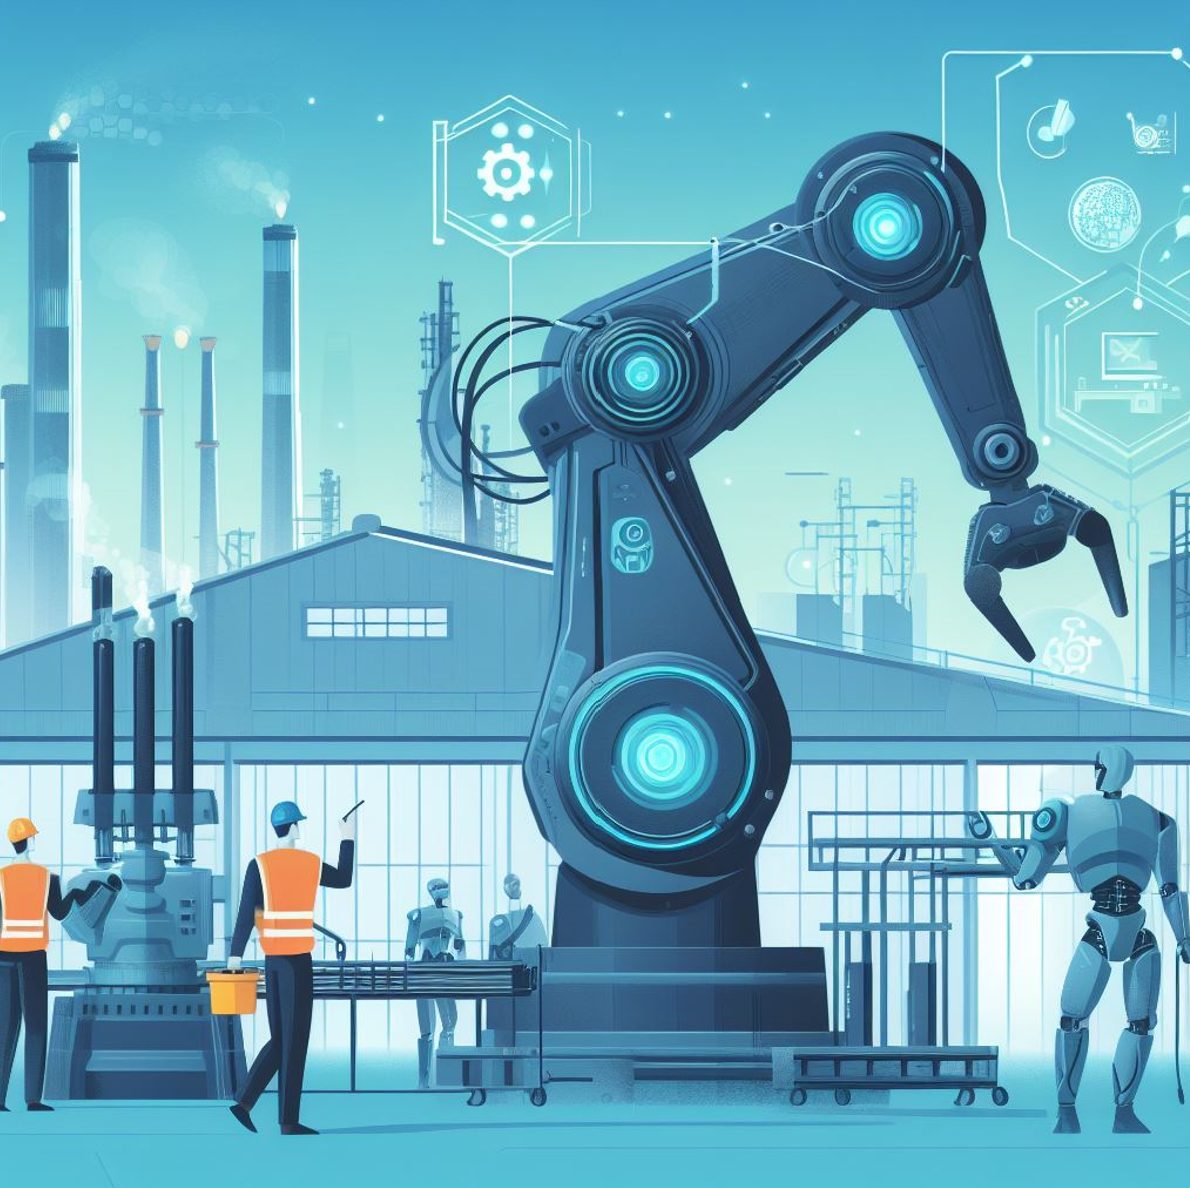 Keep Your Production Running Smoothly with Robotics and AI-Powered Predictive Maintenance